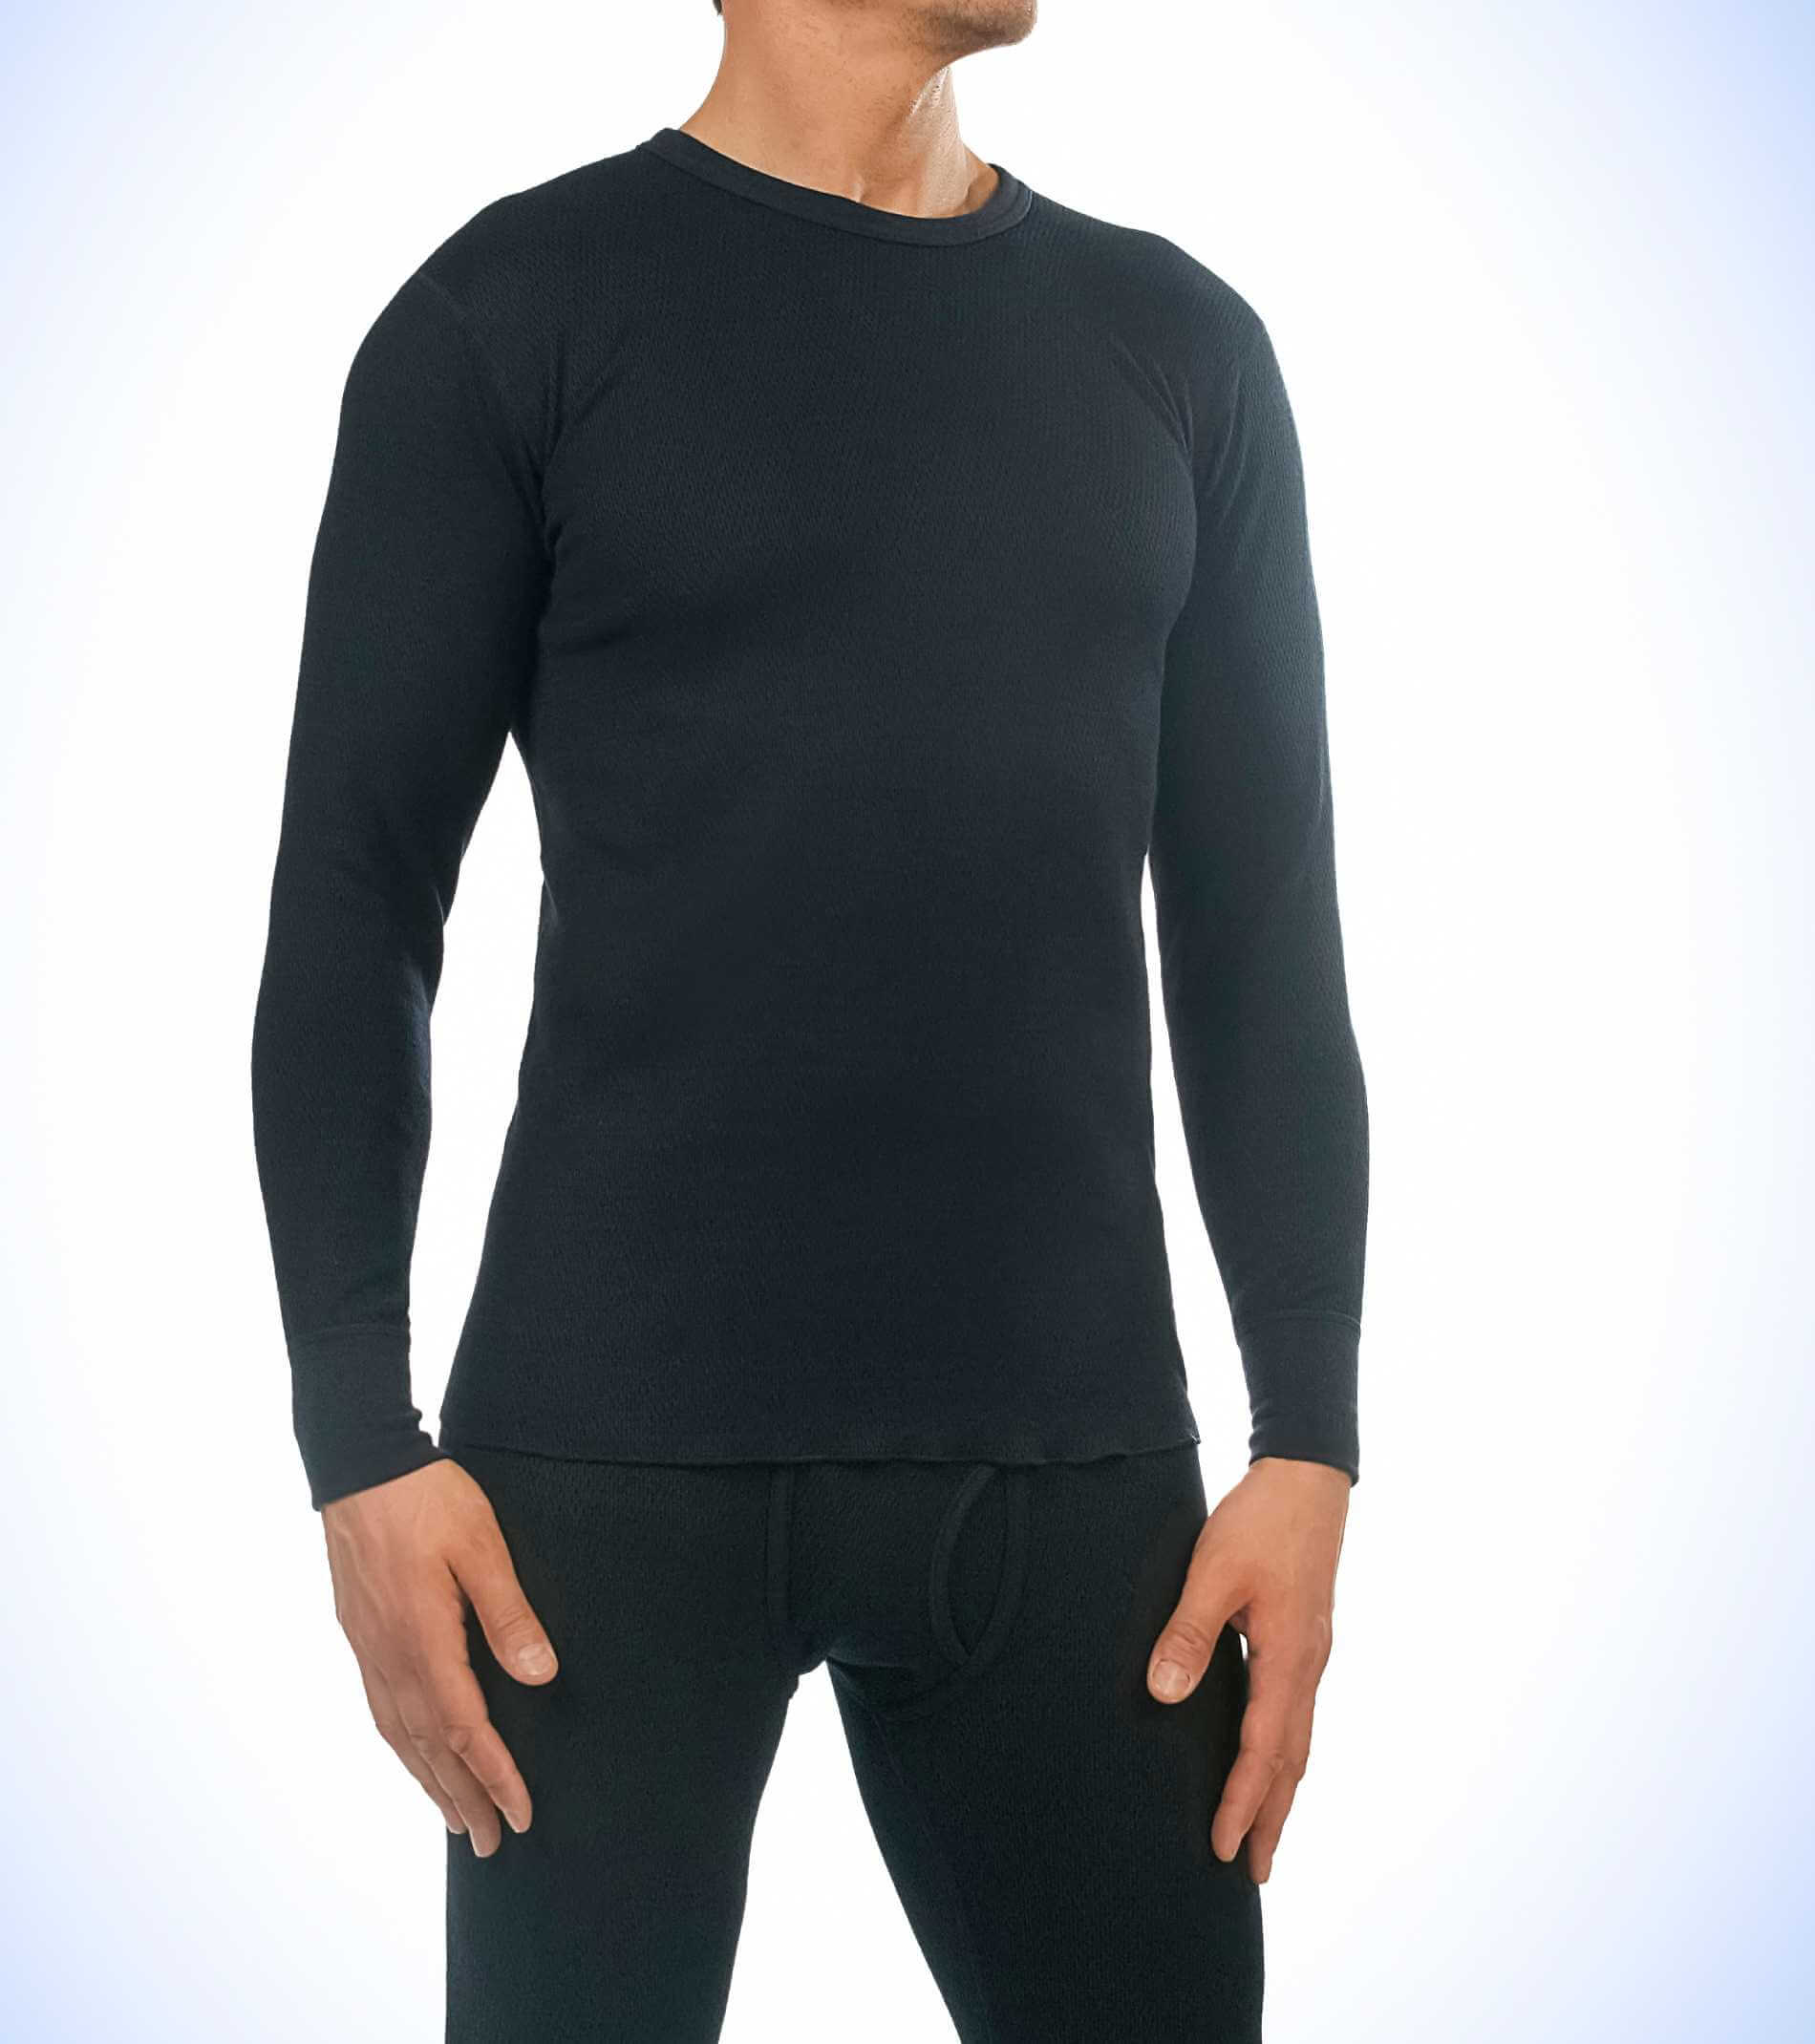 Male in thermal underwear for active winter sport.